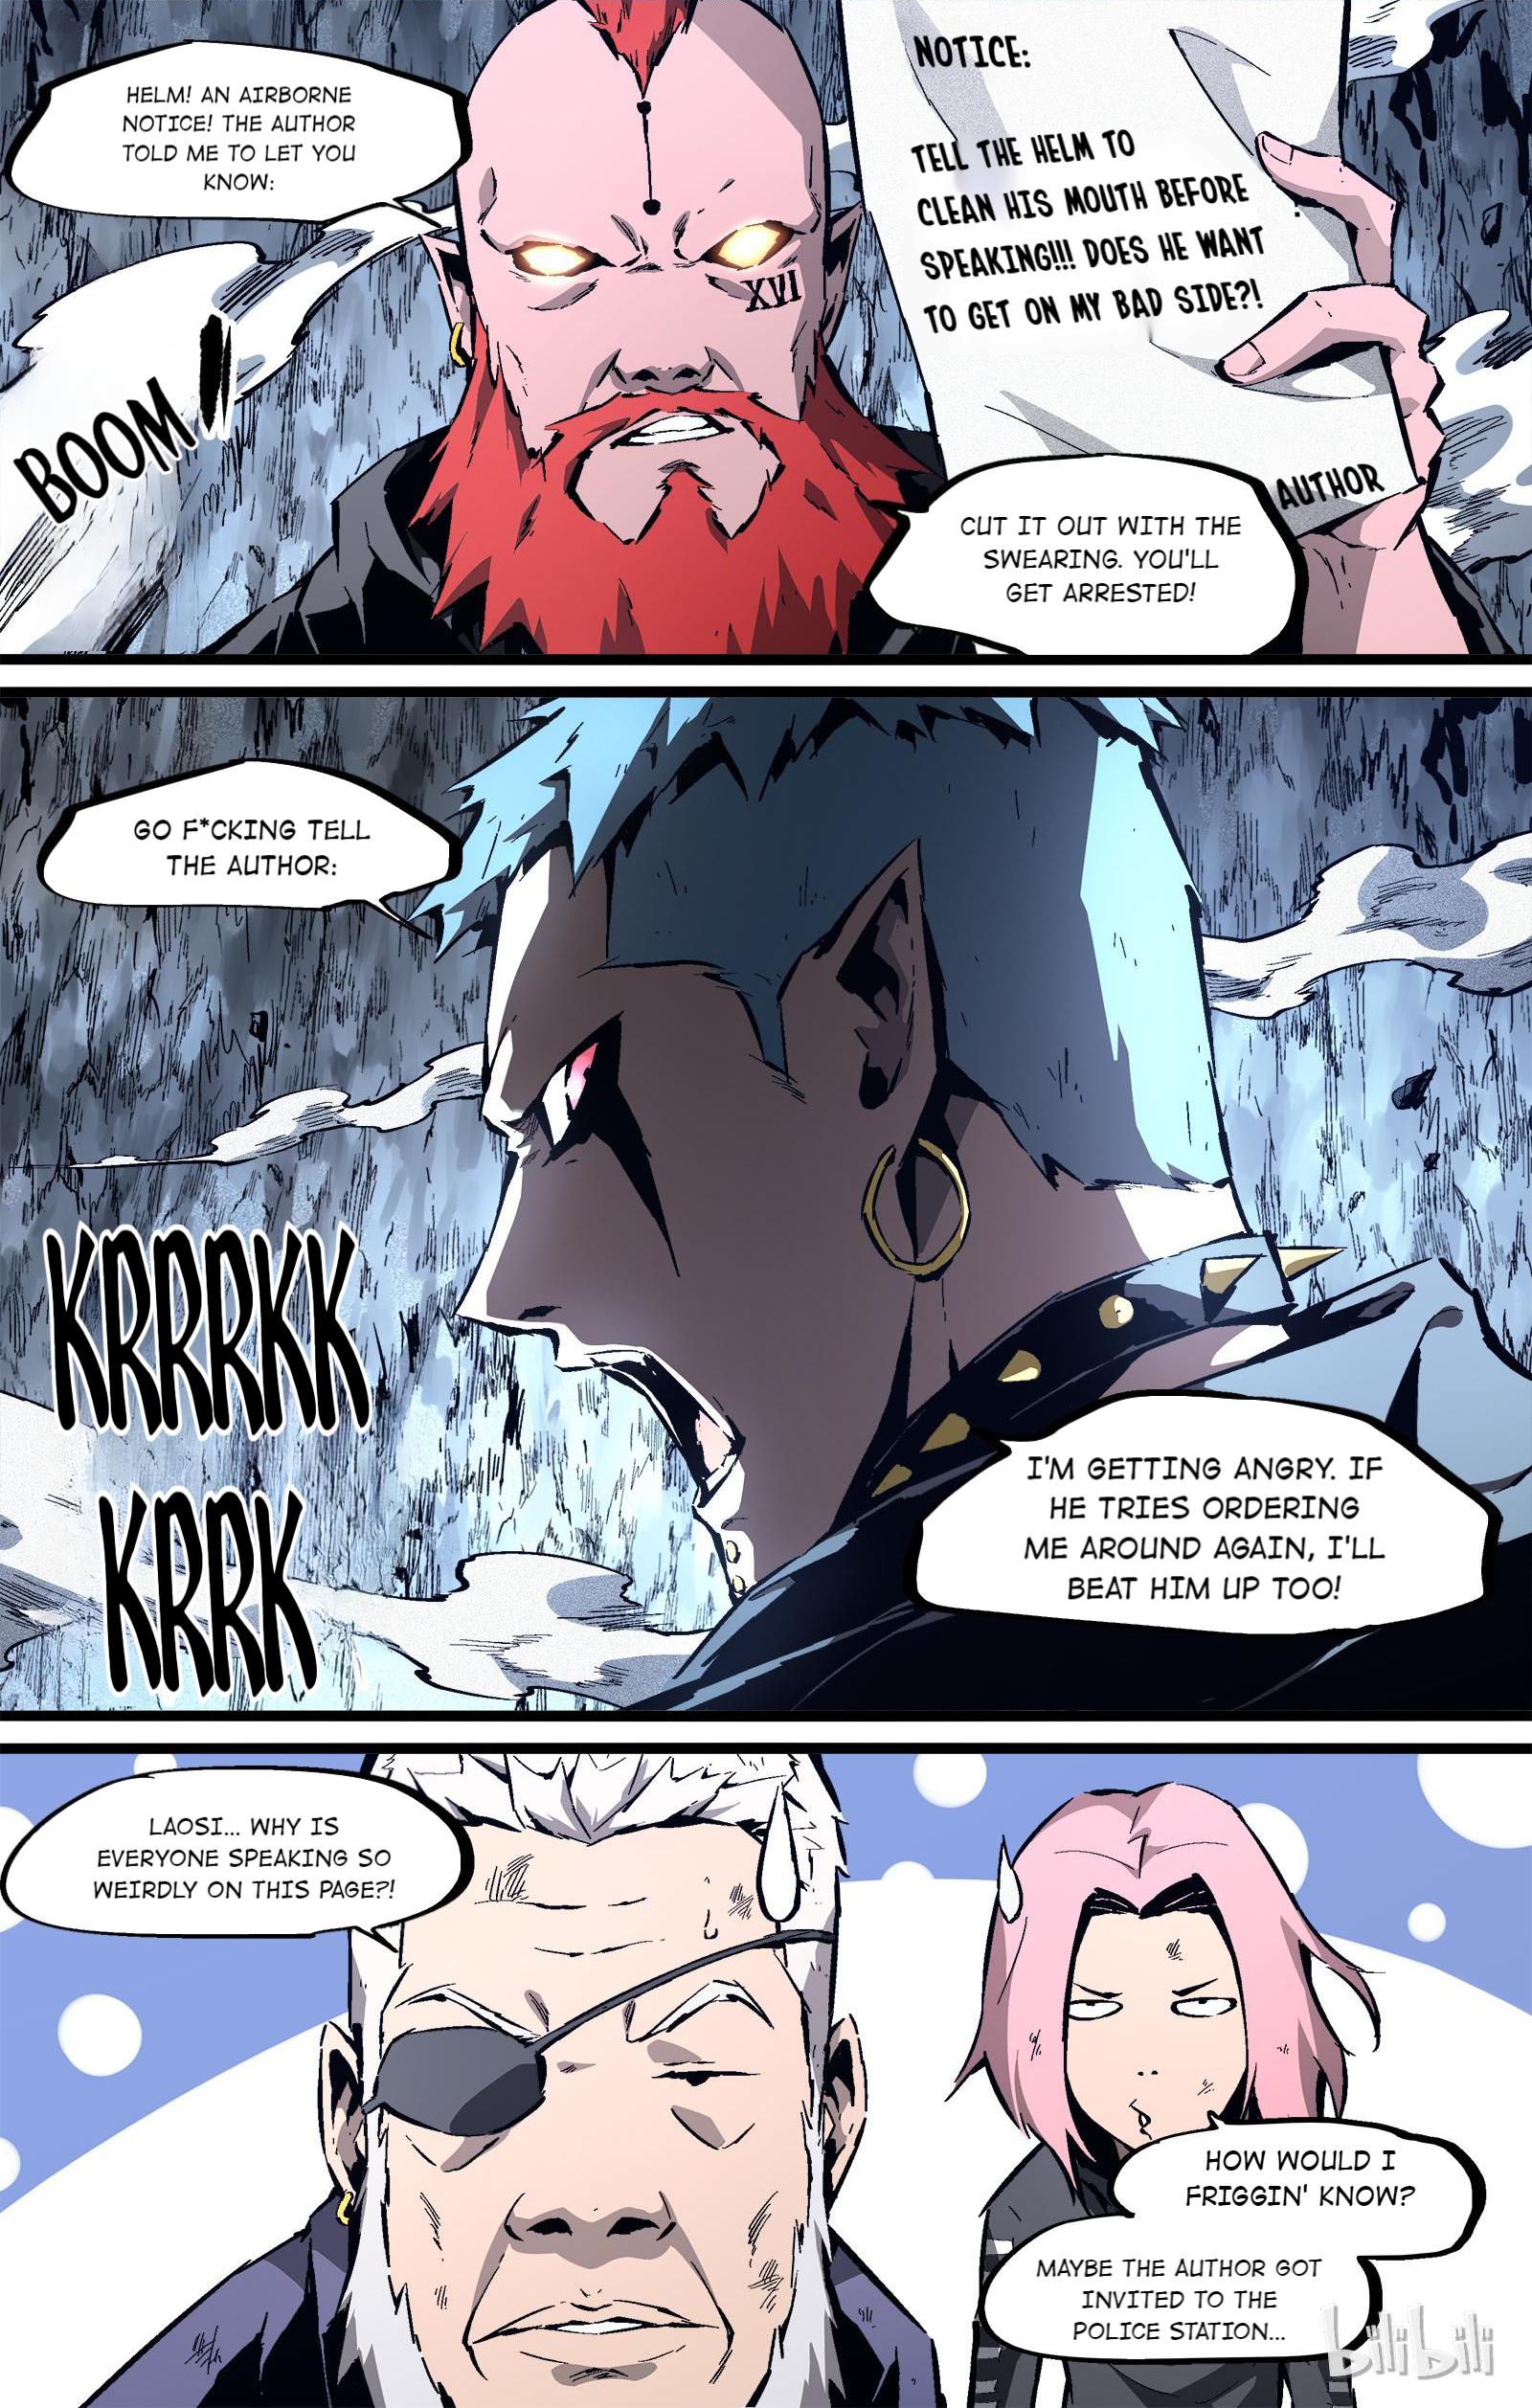 Lawless Zone Chapter 95 - Page 3